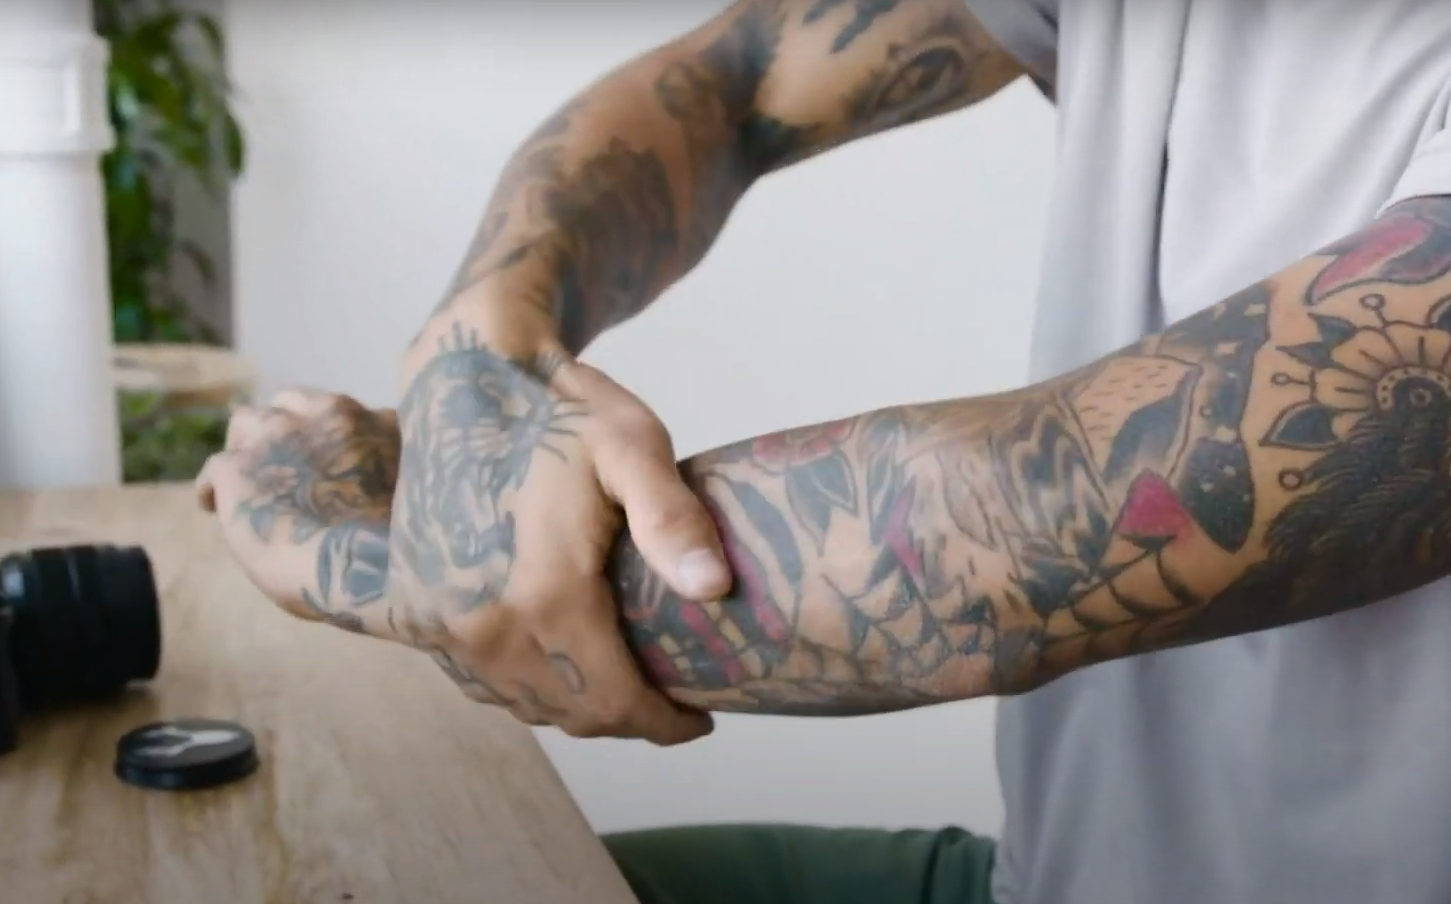 How Can Aveeno Help Aftercare for a New Tattoo?